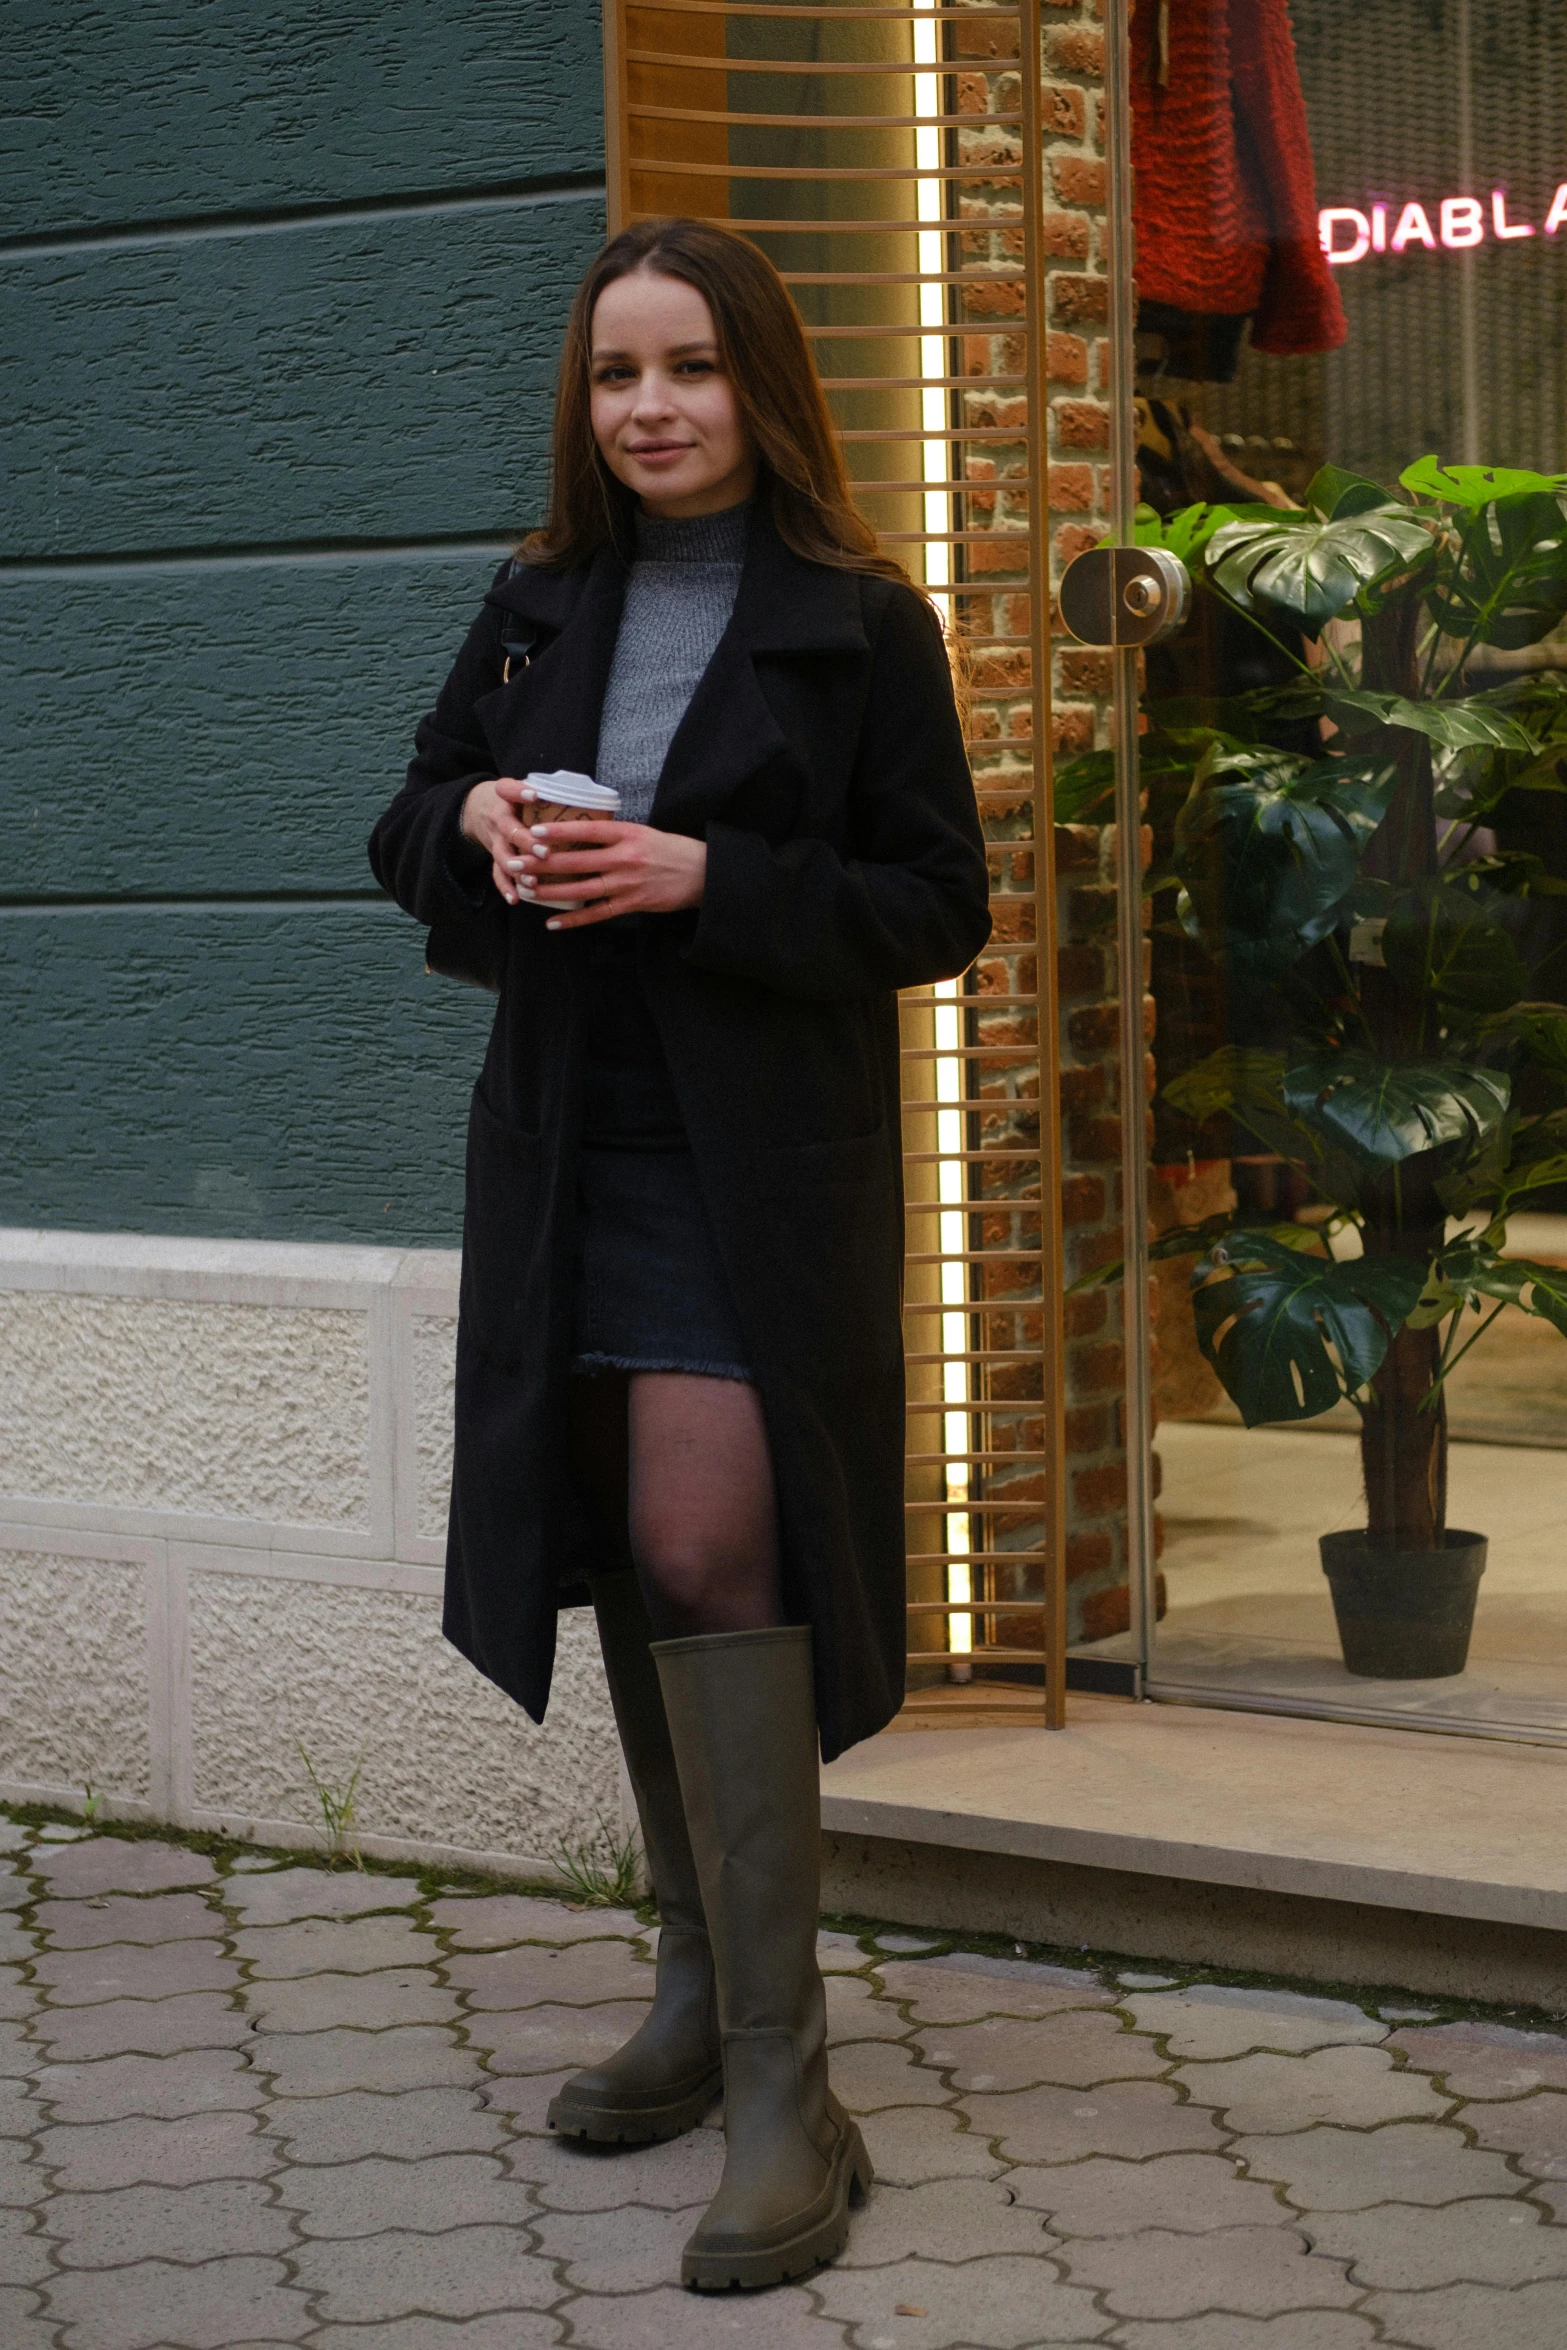 a woman standing in front of a building holding a cup of coffee, lady in black coat and pantyhose, model エリサヘス s from acquamodels, leather boots, cold as ice! 🧊